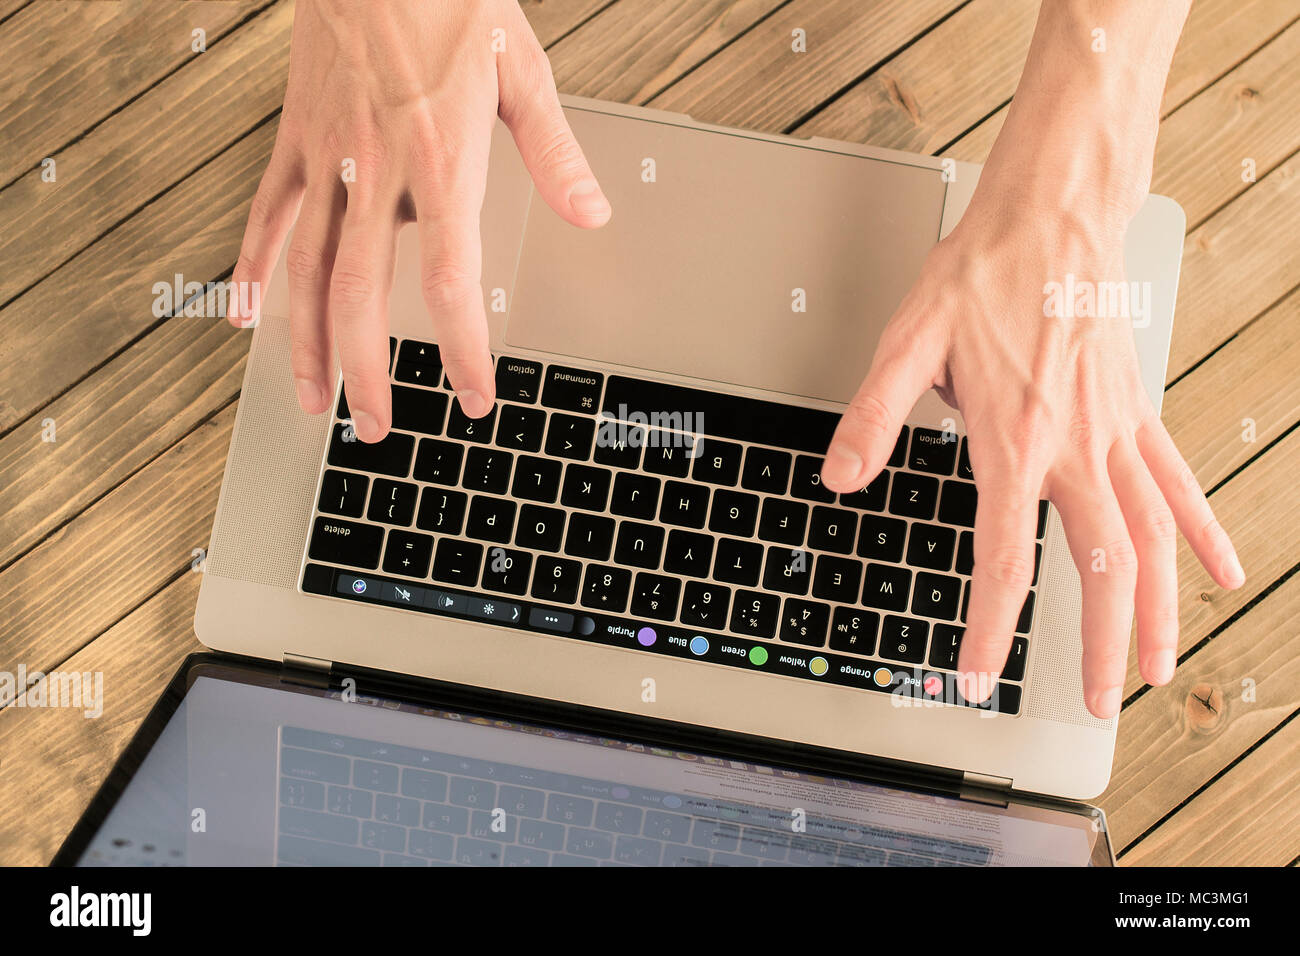 Male hands on the keyboard. Up view of male hands typing on the MacBook keyboard. Stock Photo